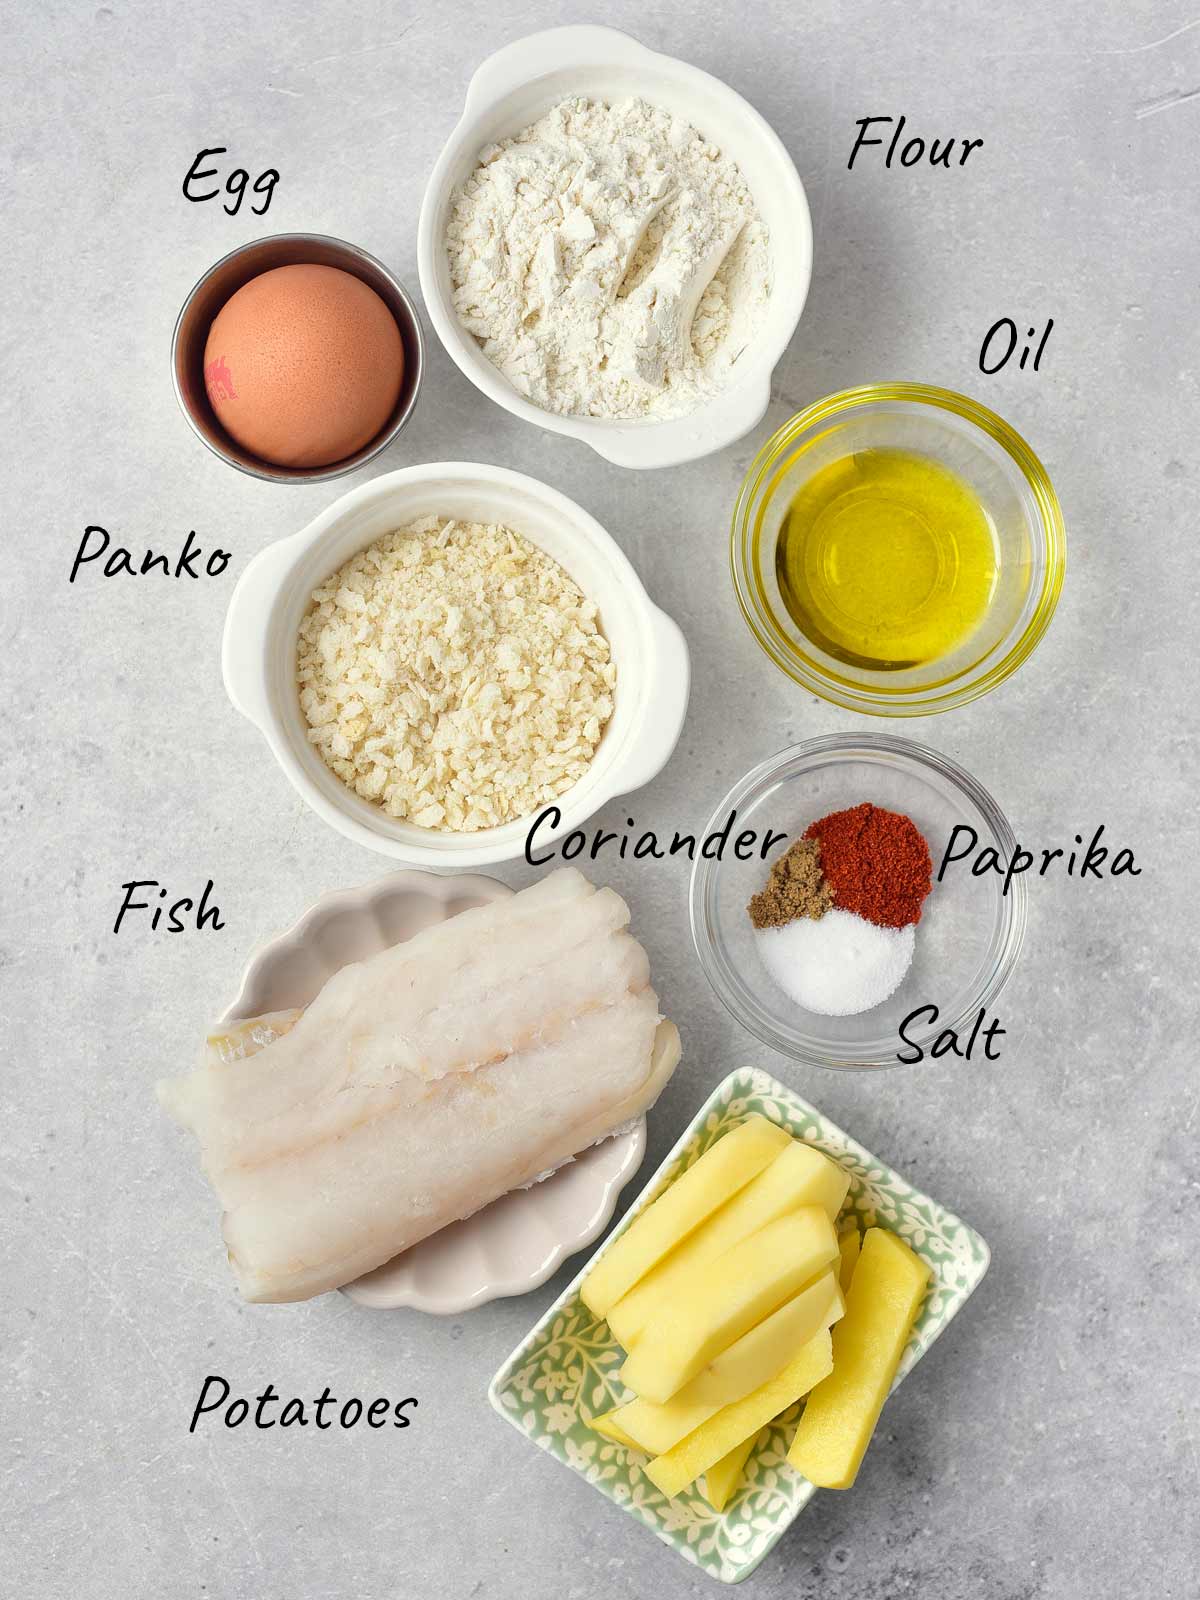 The ingredients for a fish dish are shown on a grey background.